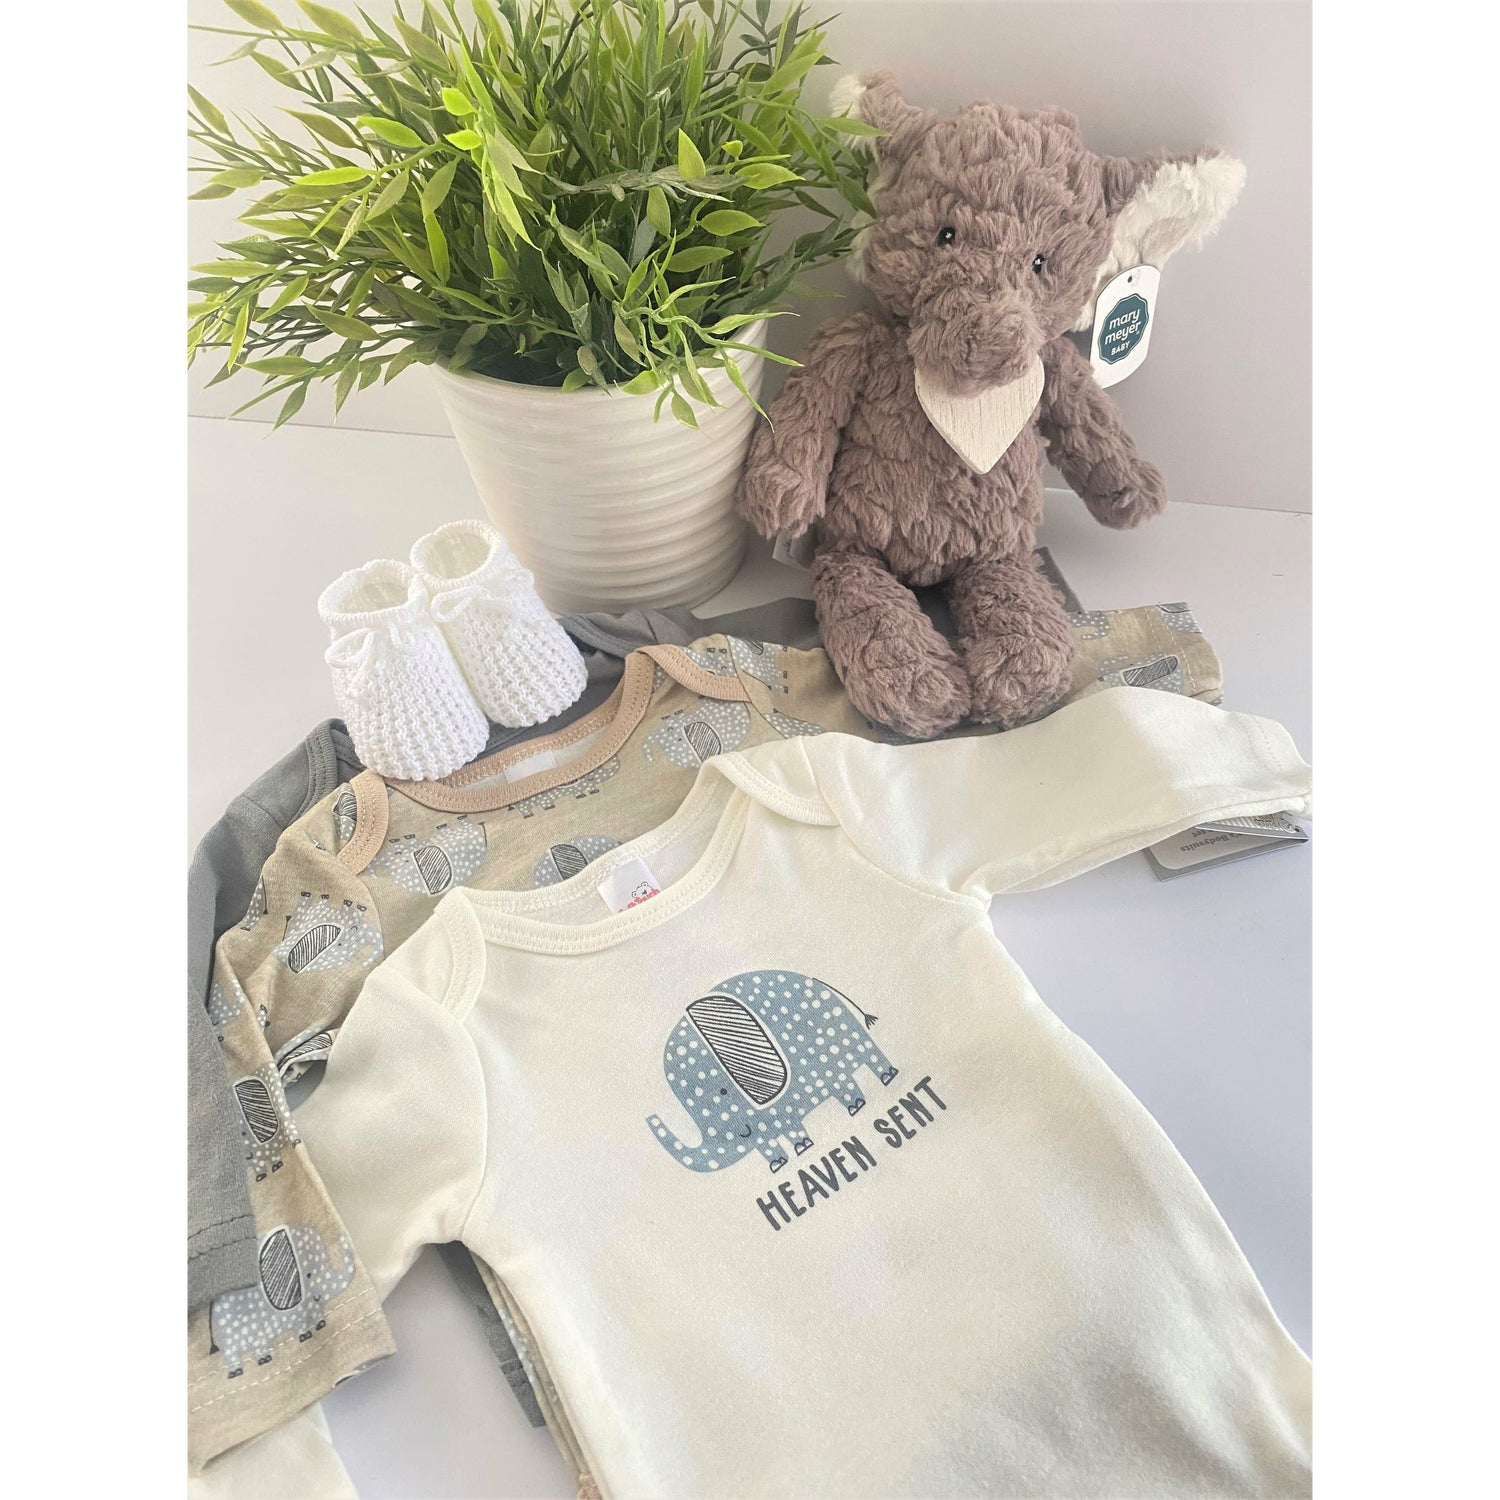 A set of 3 neutral baby bodysuit with an elephant theme one of which has the text " Heaven sent".